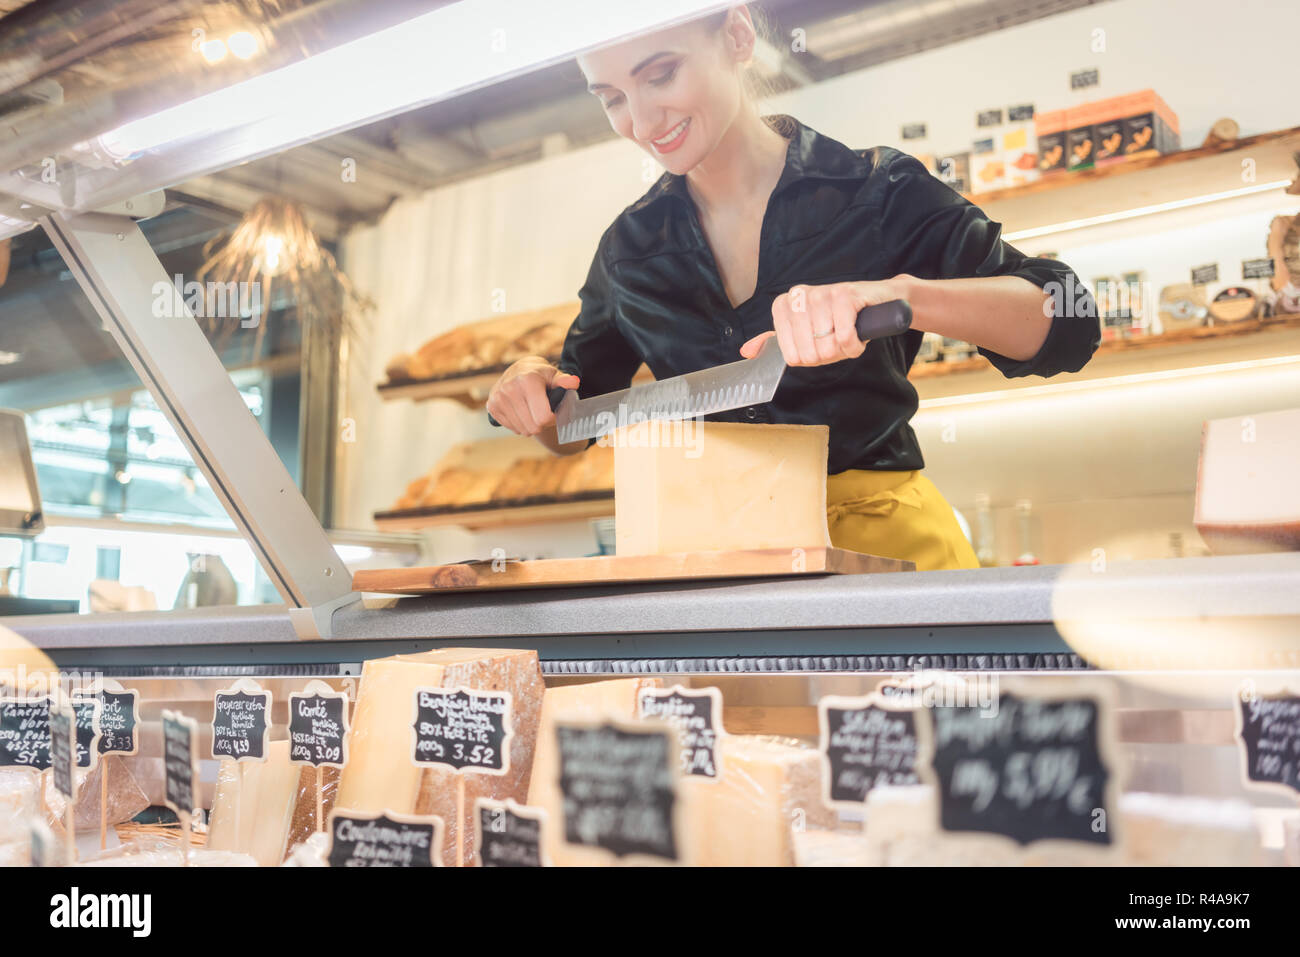 Young shop clerk in deli cutting cheese Stock Photo